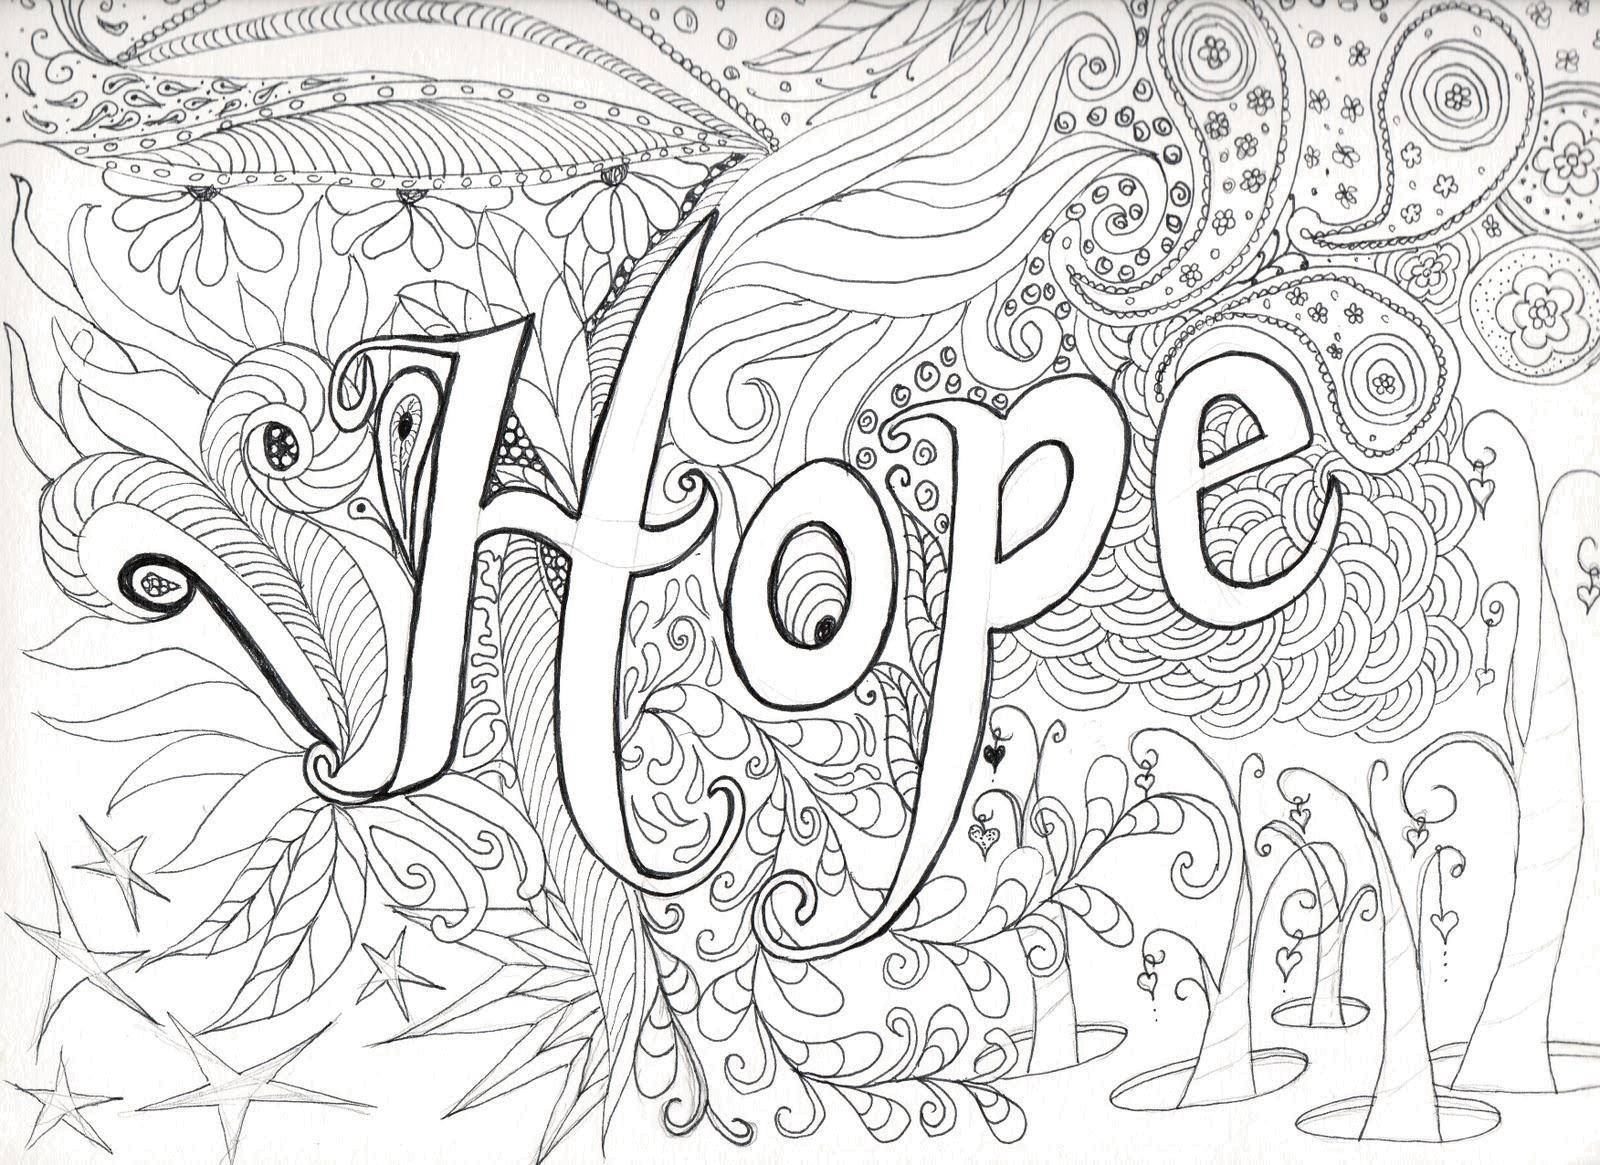 Coloring Hope patterns. Category With patterns. Tags:  Labels, patterns.